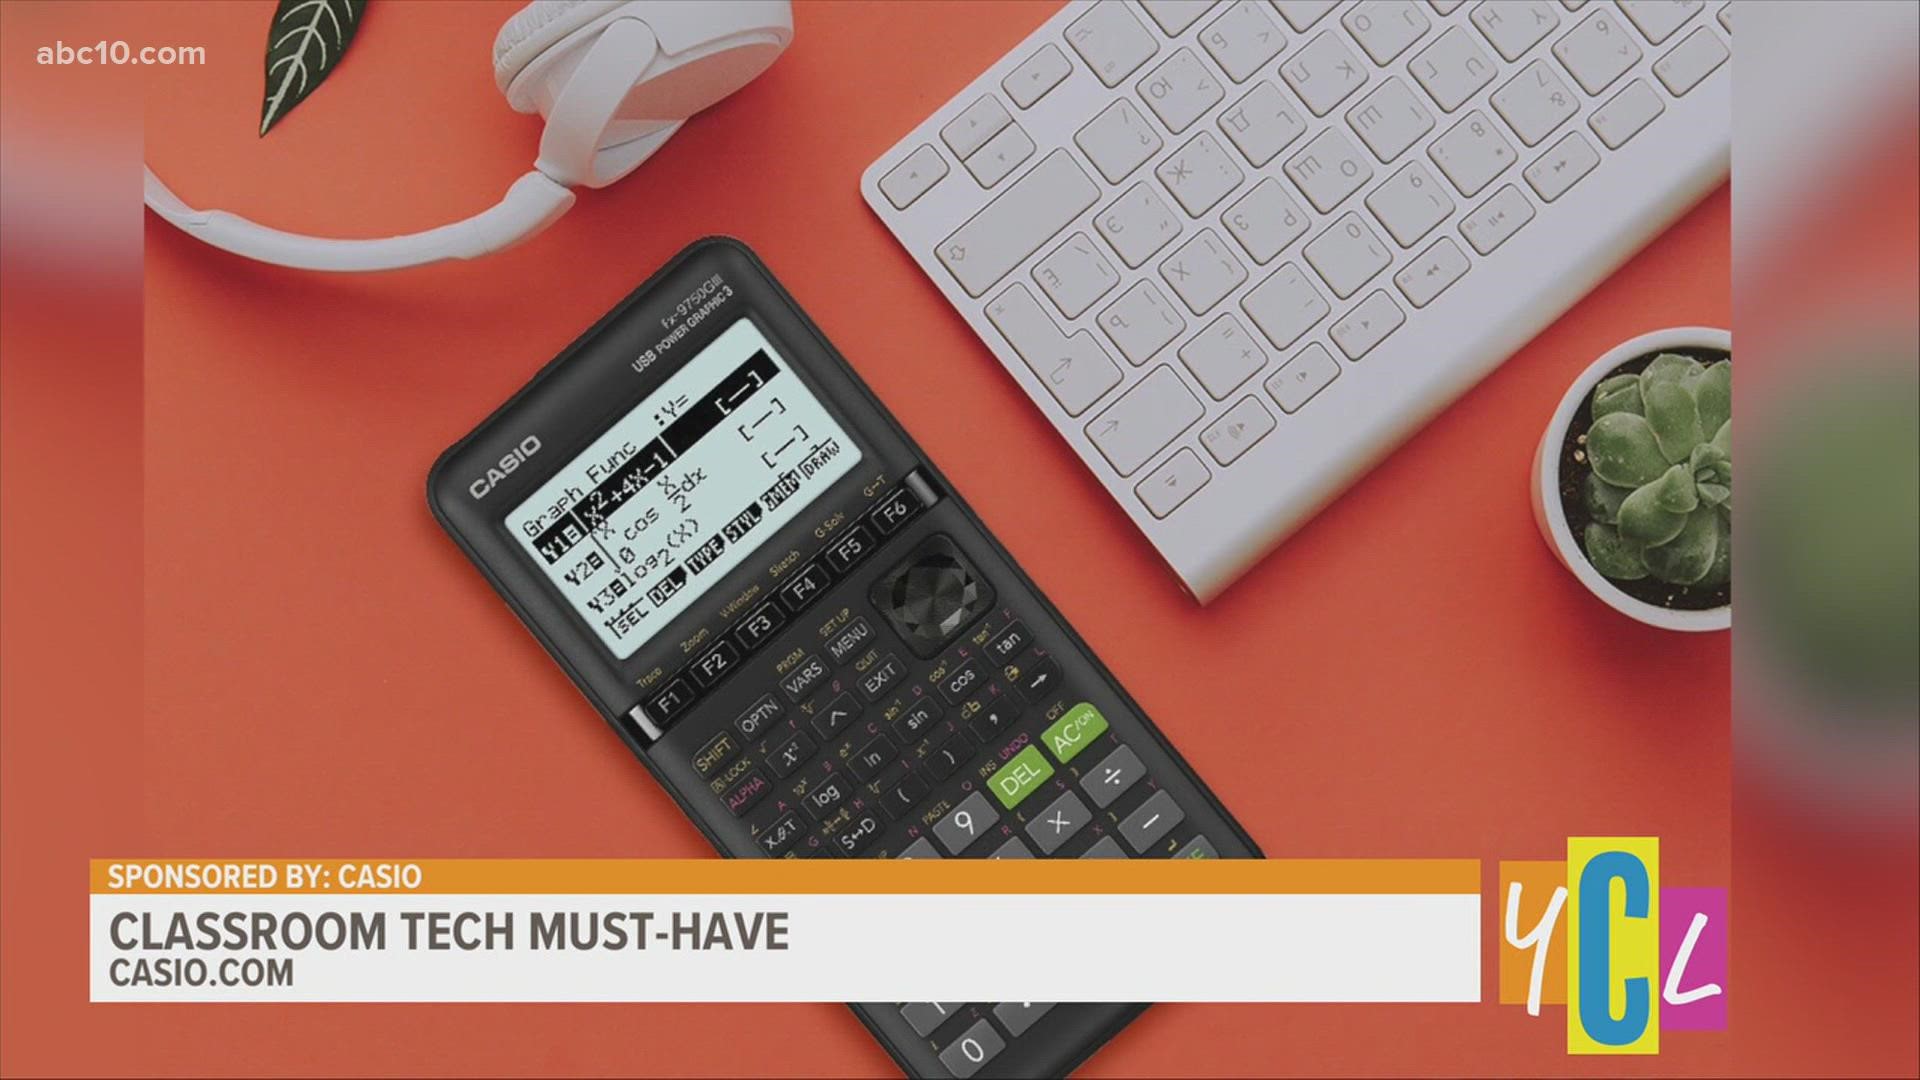 Be ready and prepped for the new school season with the right back to school gadget to sum it all up. This segment paid for by Casio.